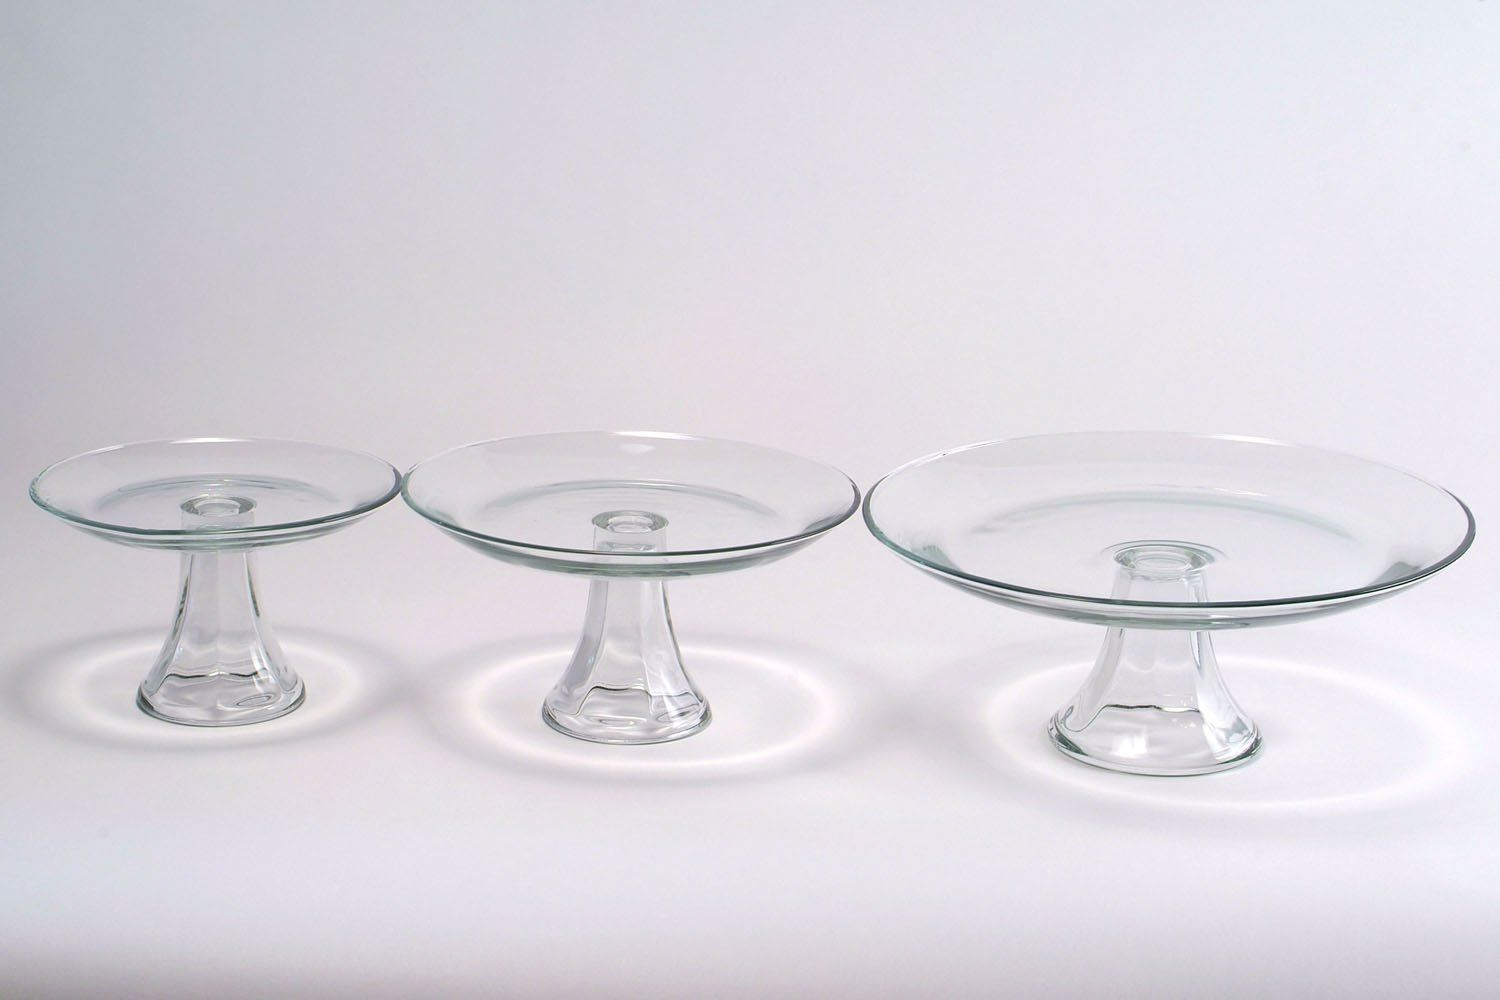 Glass Cake Stand Hire Return Clean or Dirty Option Available